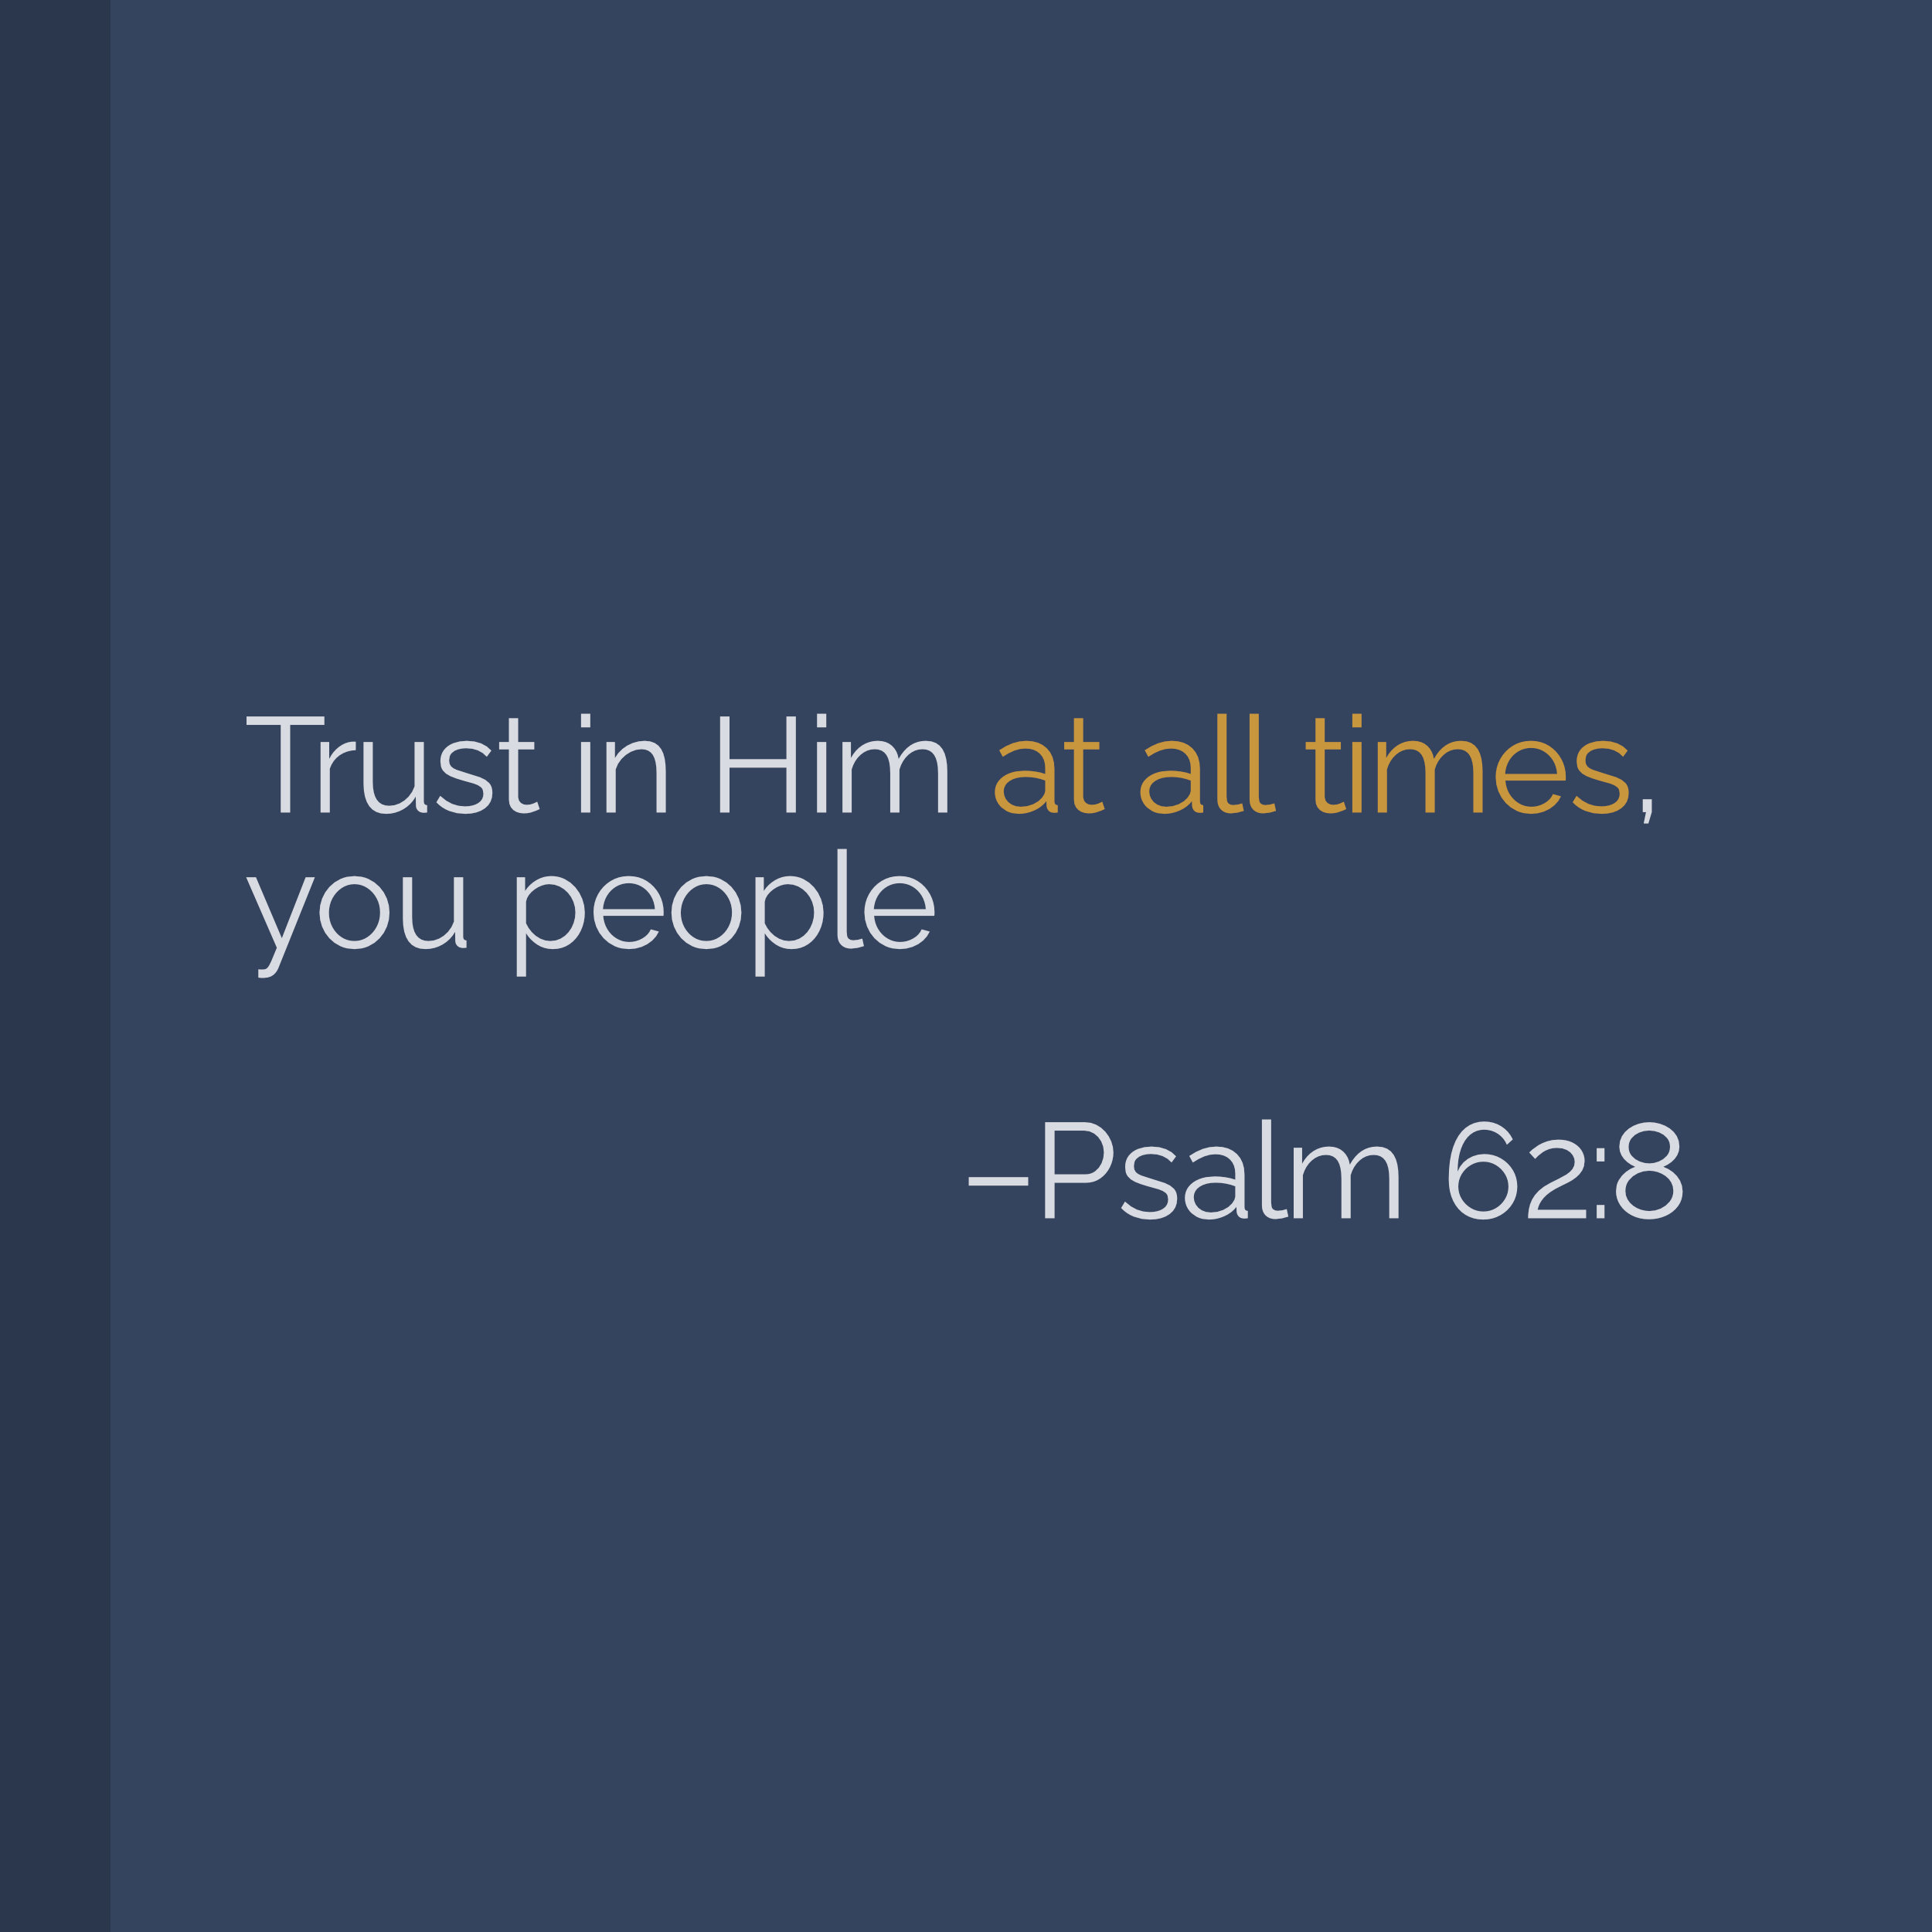 Trust in Him at all times